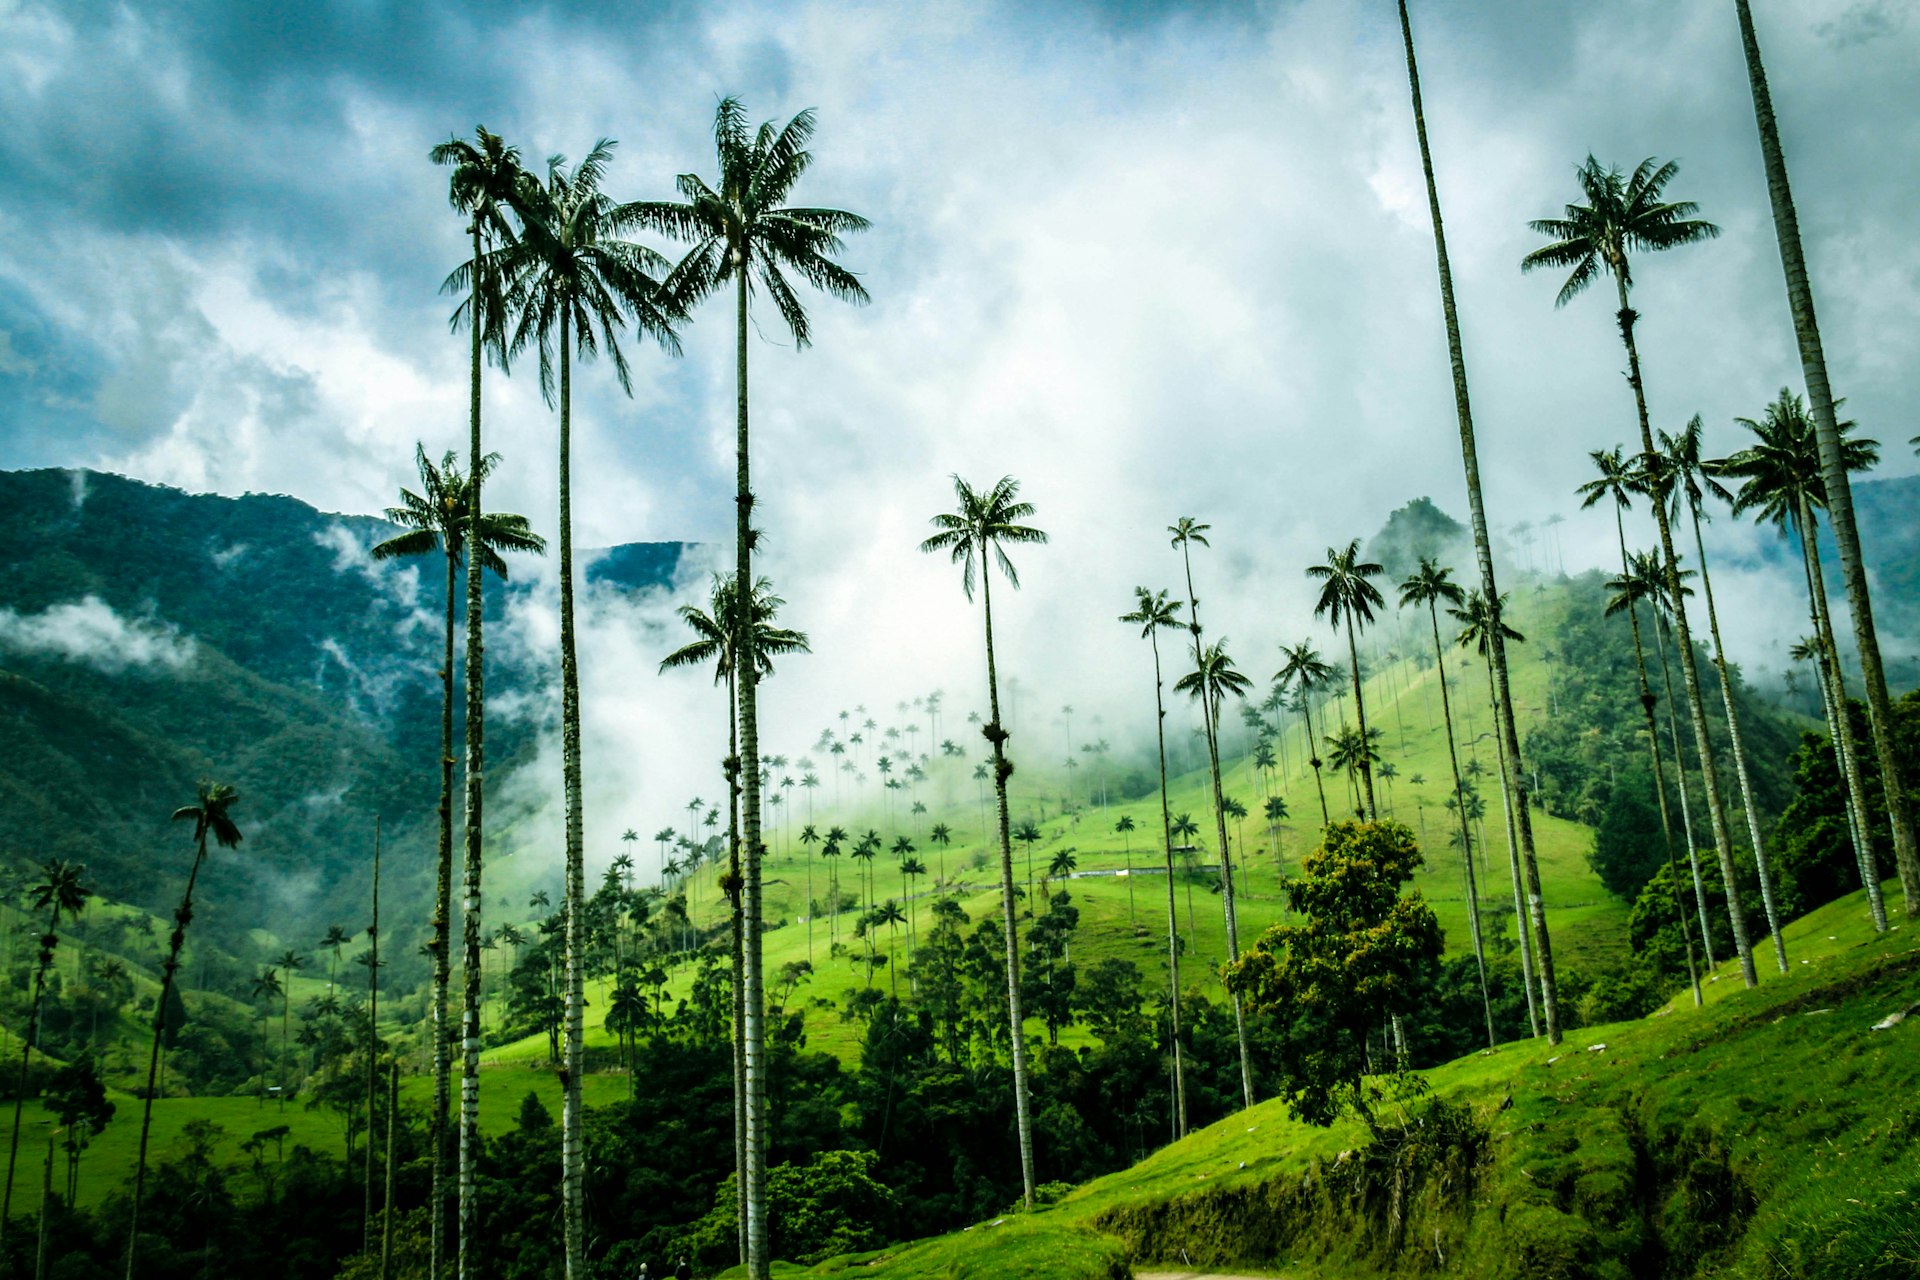 Quindio wax palms in the Cocora Valley, Colombia